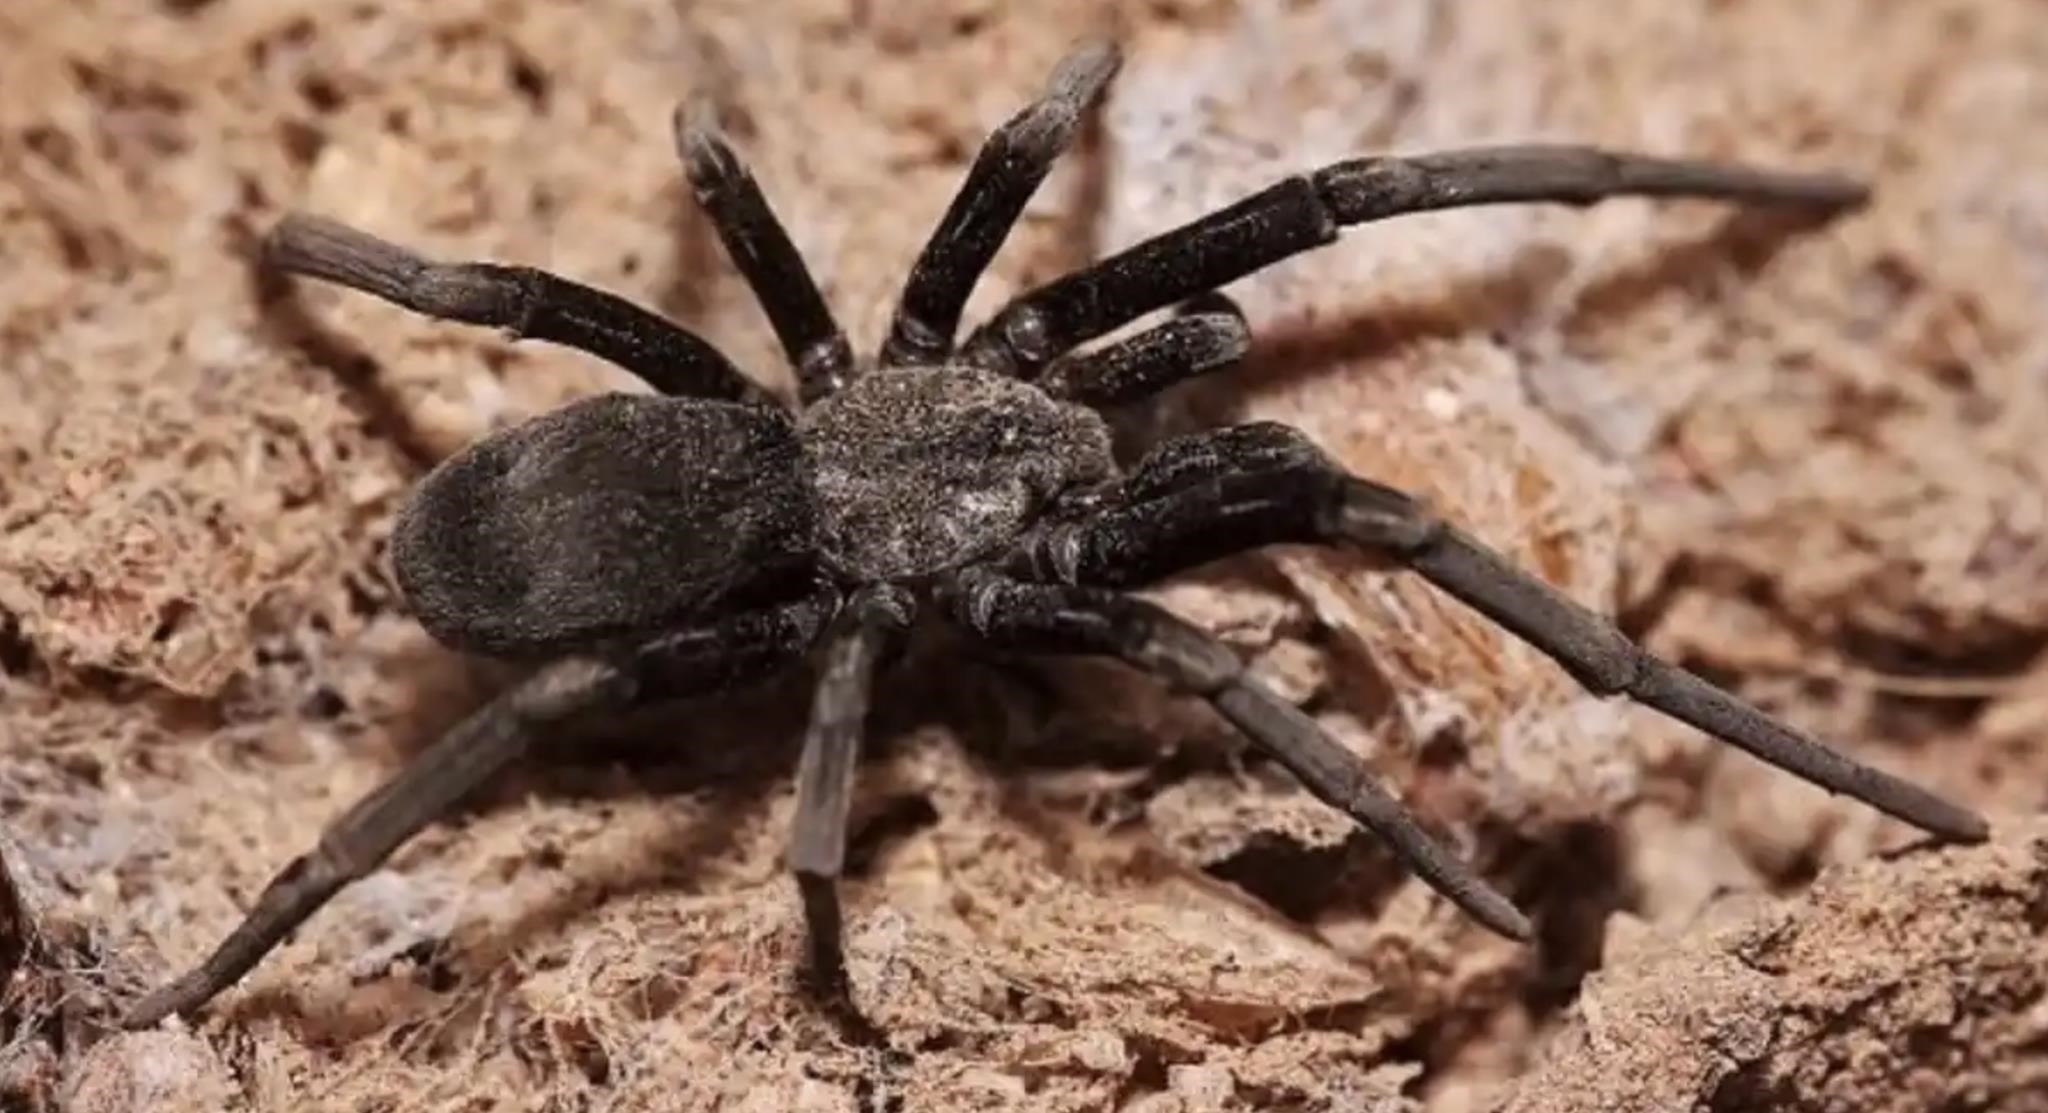 Tech: A 10-centimeter-long poisonous hunting spider crawled out of the suitcase of a traveler returning from Africa in Scotland